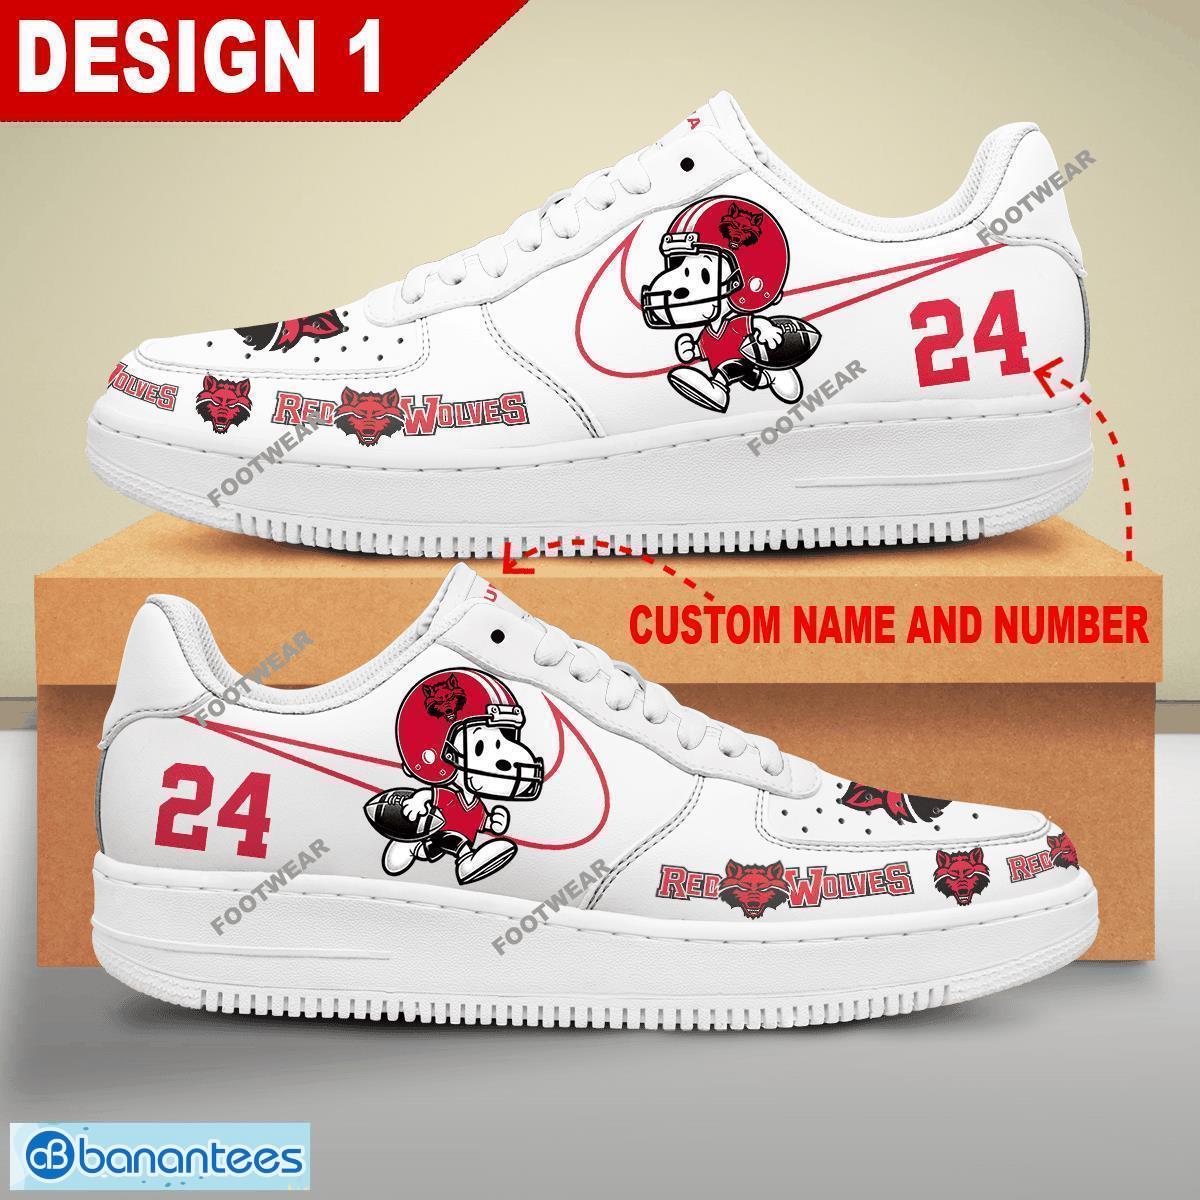 Custom Number And Name NCAA Arkansas State Red Wolves Snoopy Play Funny Football Air Force 1 Shoes Multiple Design - NCAA Arkansas State Red Wolves Snoopy Play Football Personalized Air Force 1 Shoes Design 1